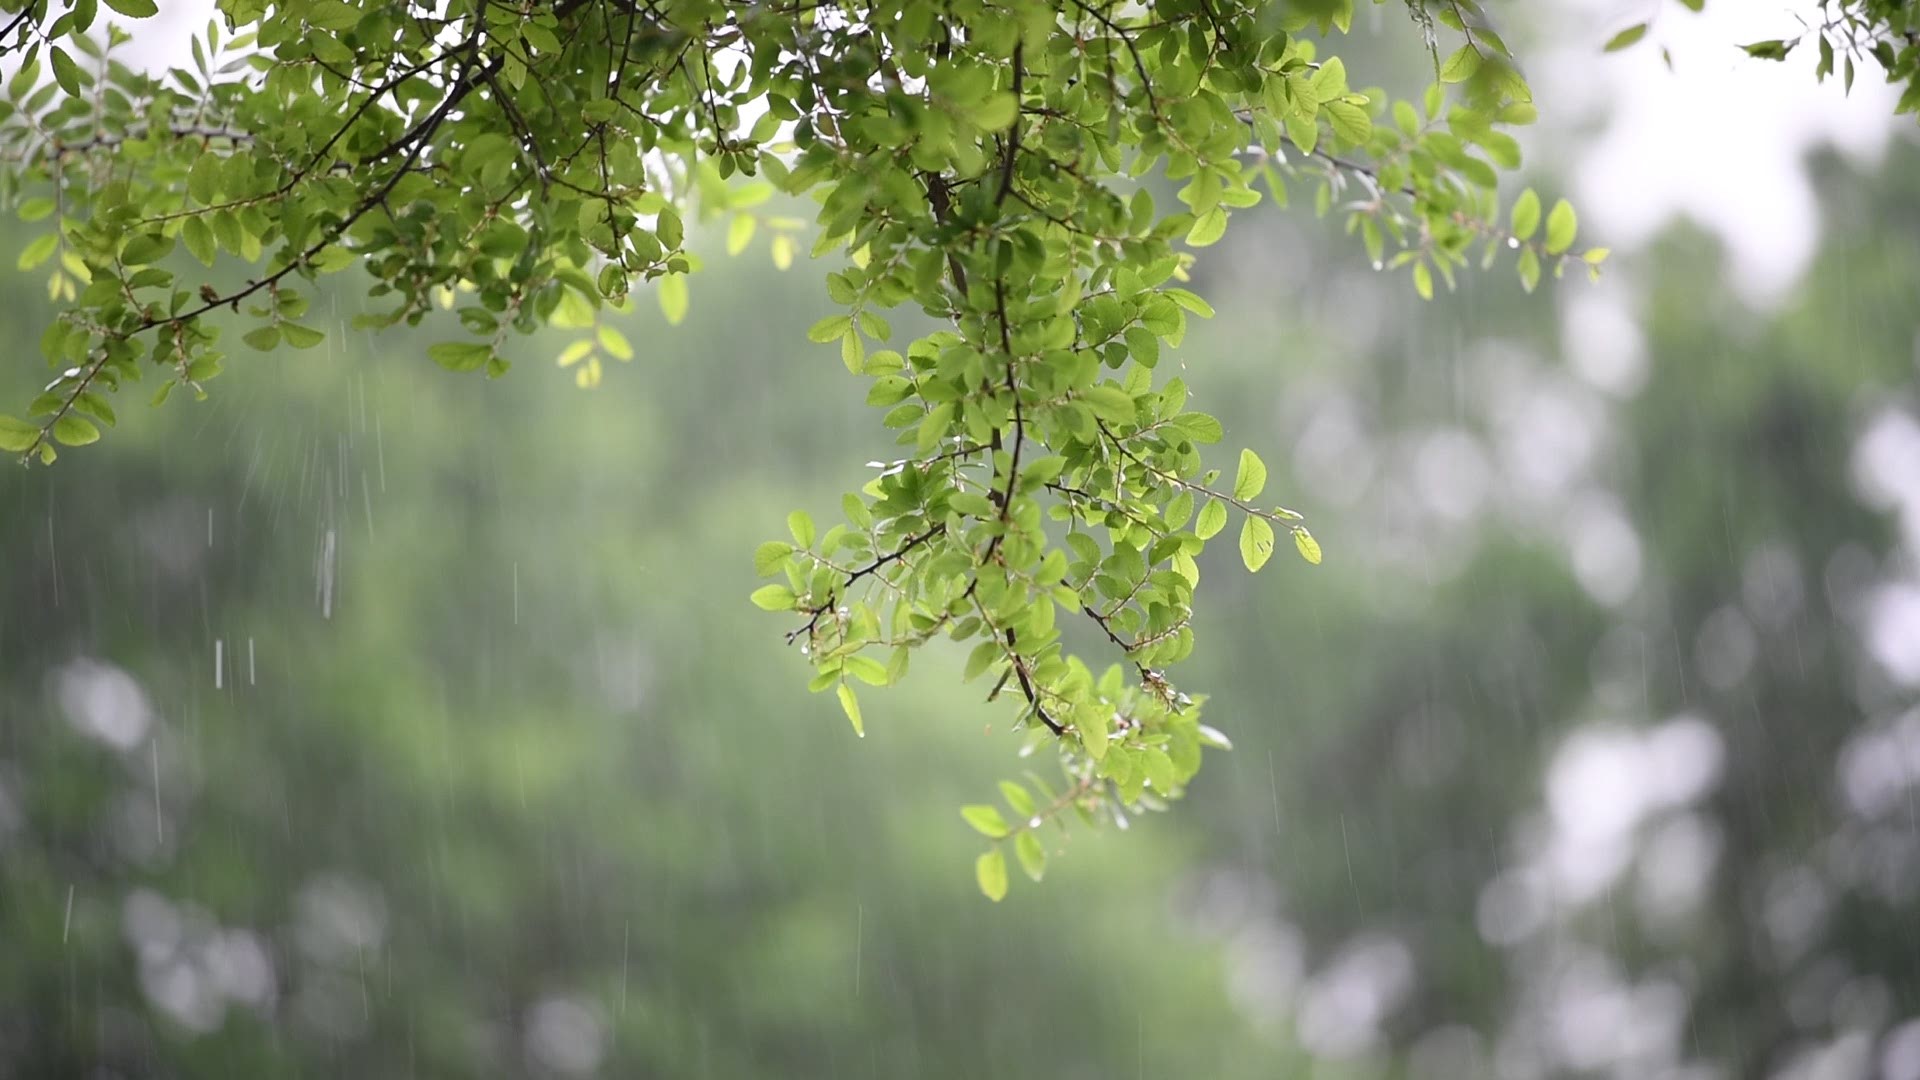 Soothing sounds of rain.